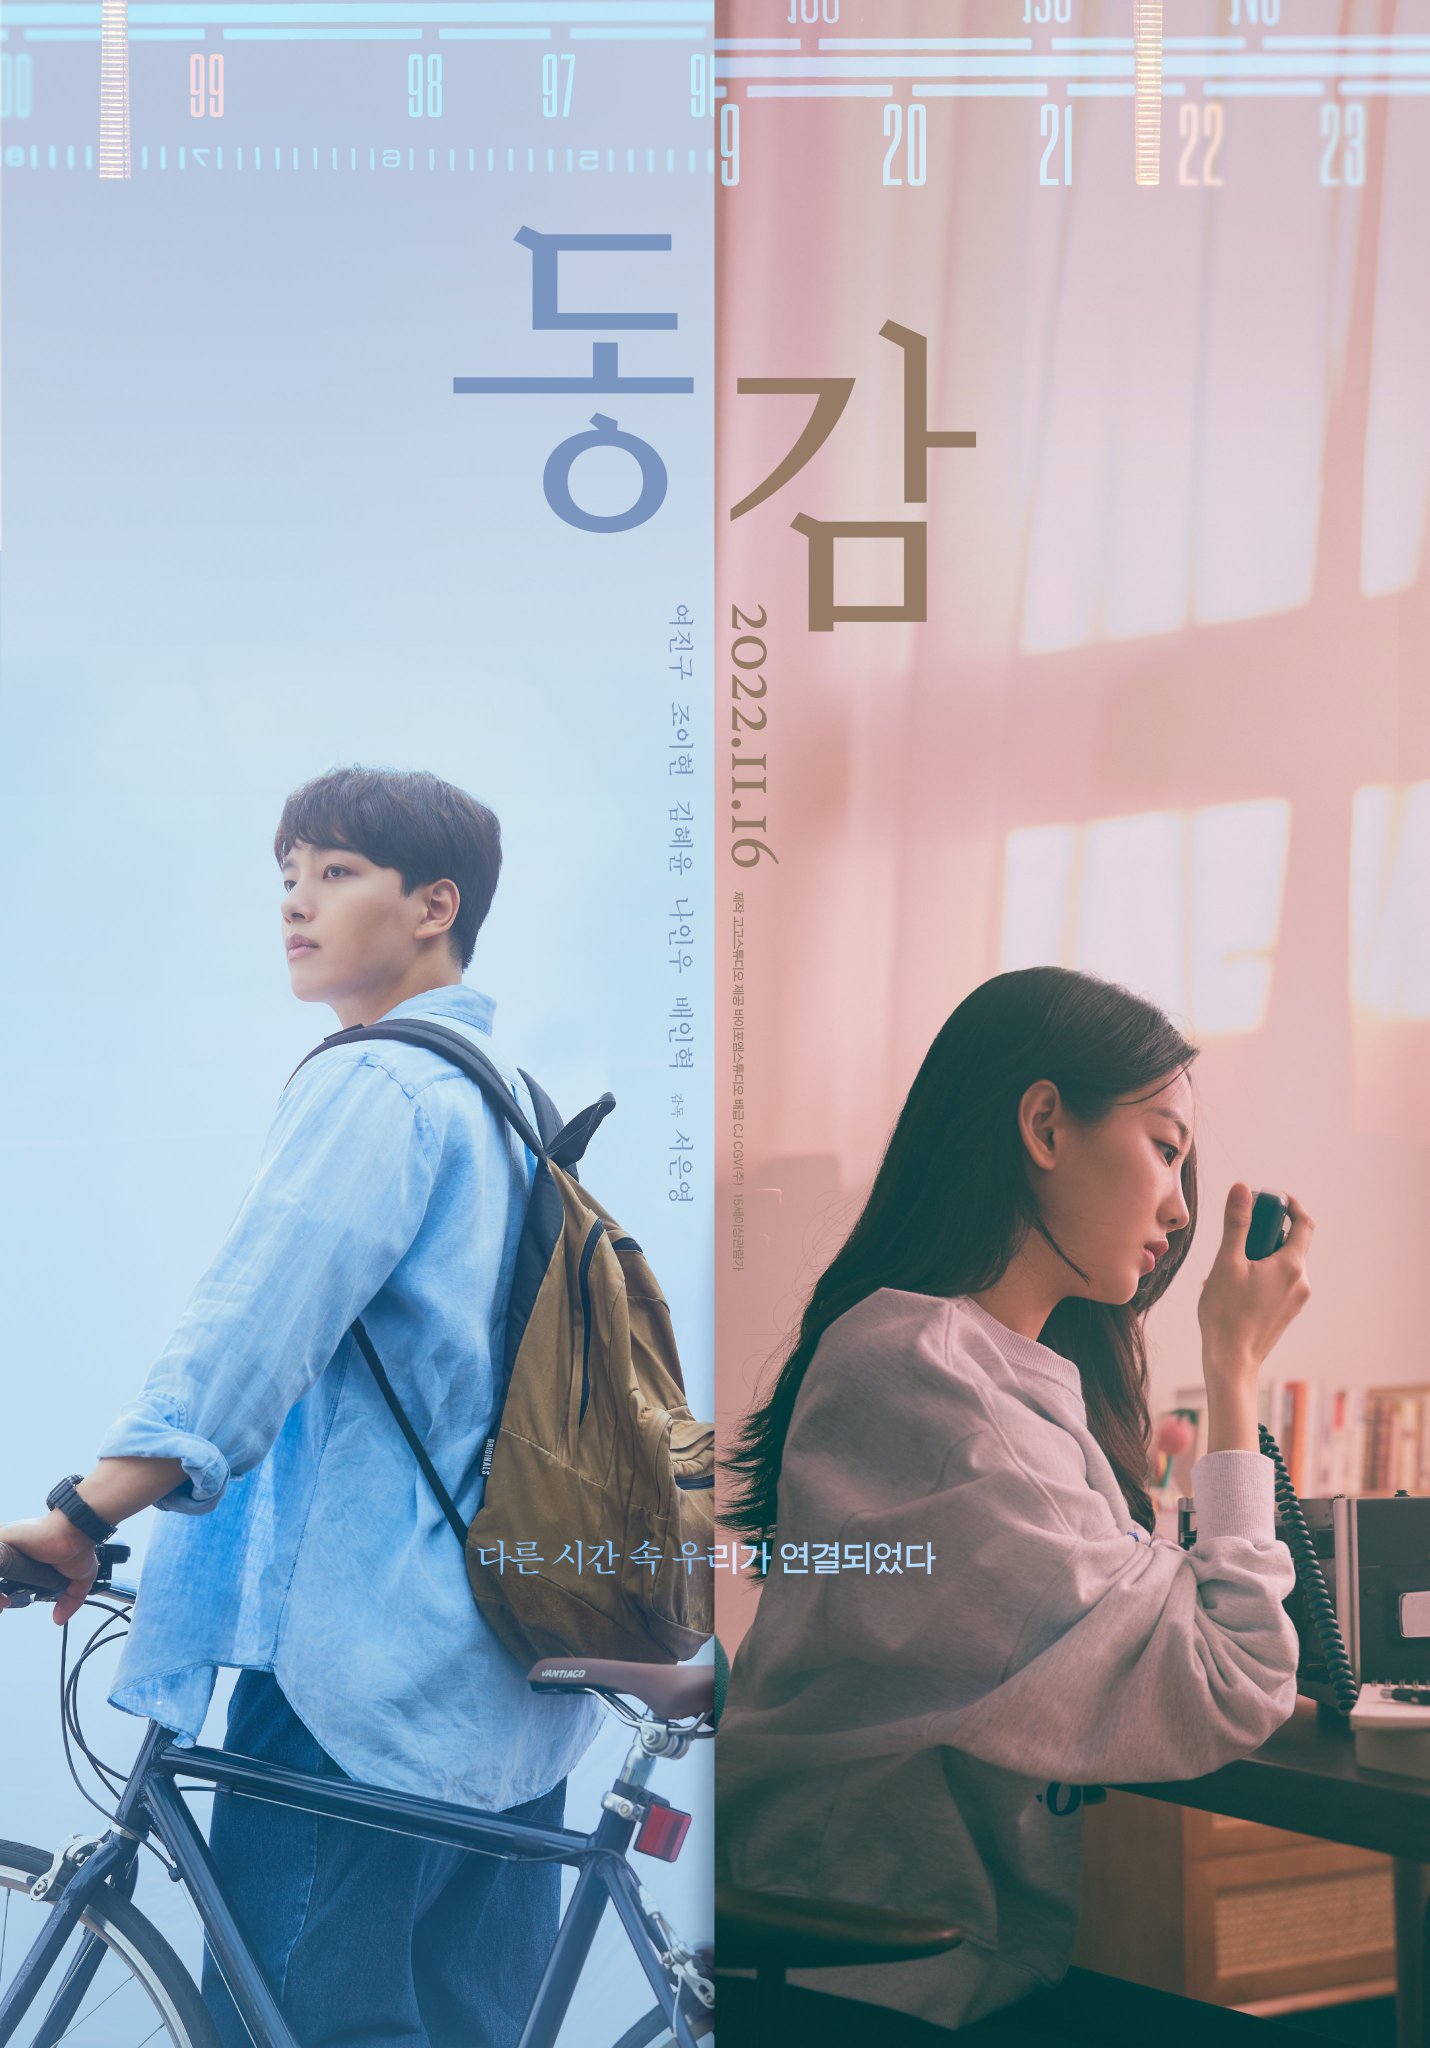 Unnie - Upcoming time-rift youth film #Sympathy (Ditto remake) releases its  emotional teaser poster starring #YeoJinGoo #ChoYiHyun #KimHyeYoon #NaInWoo  & #BaeInHyuk 💙💗 The movie will premiere on November 16, 2022! There are